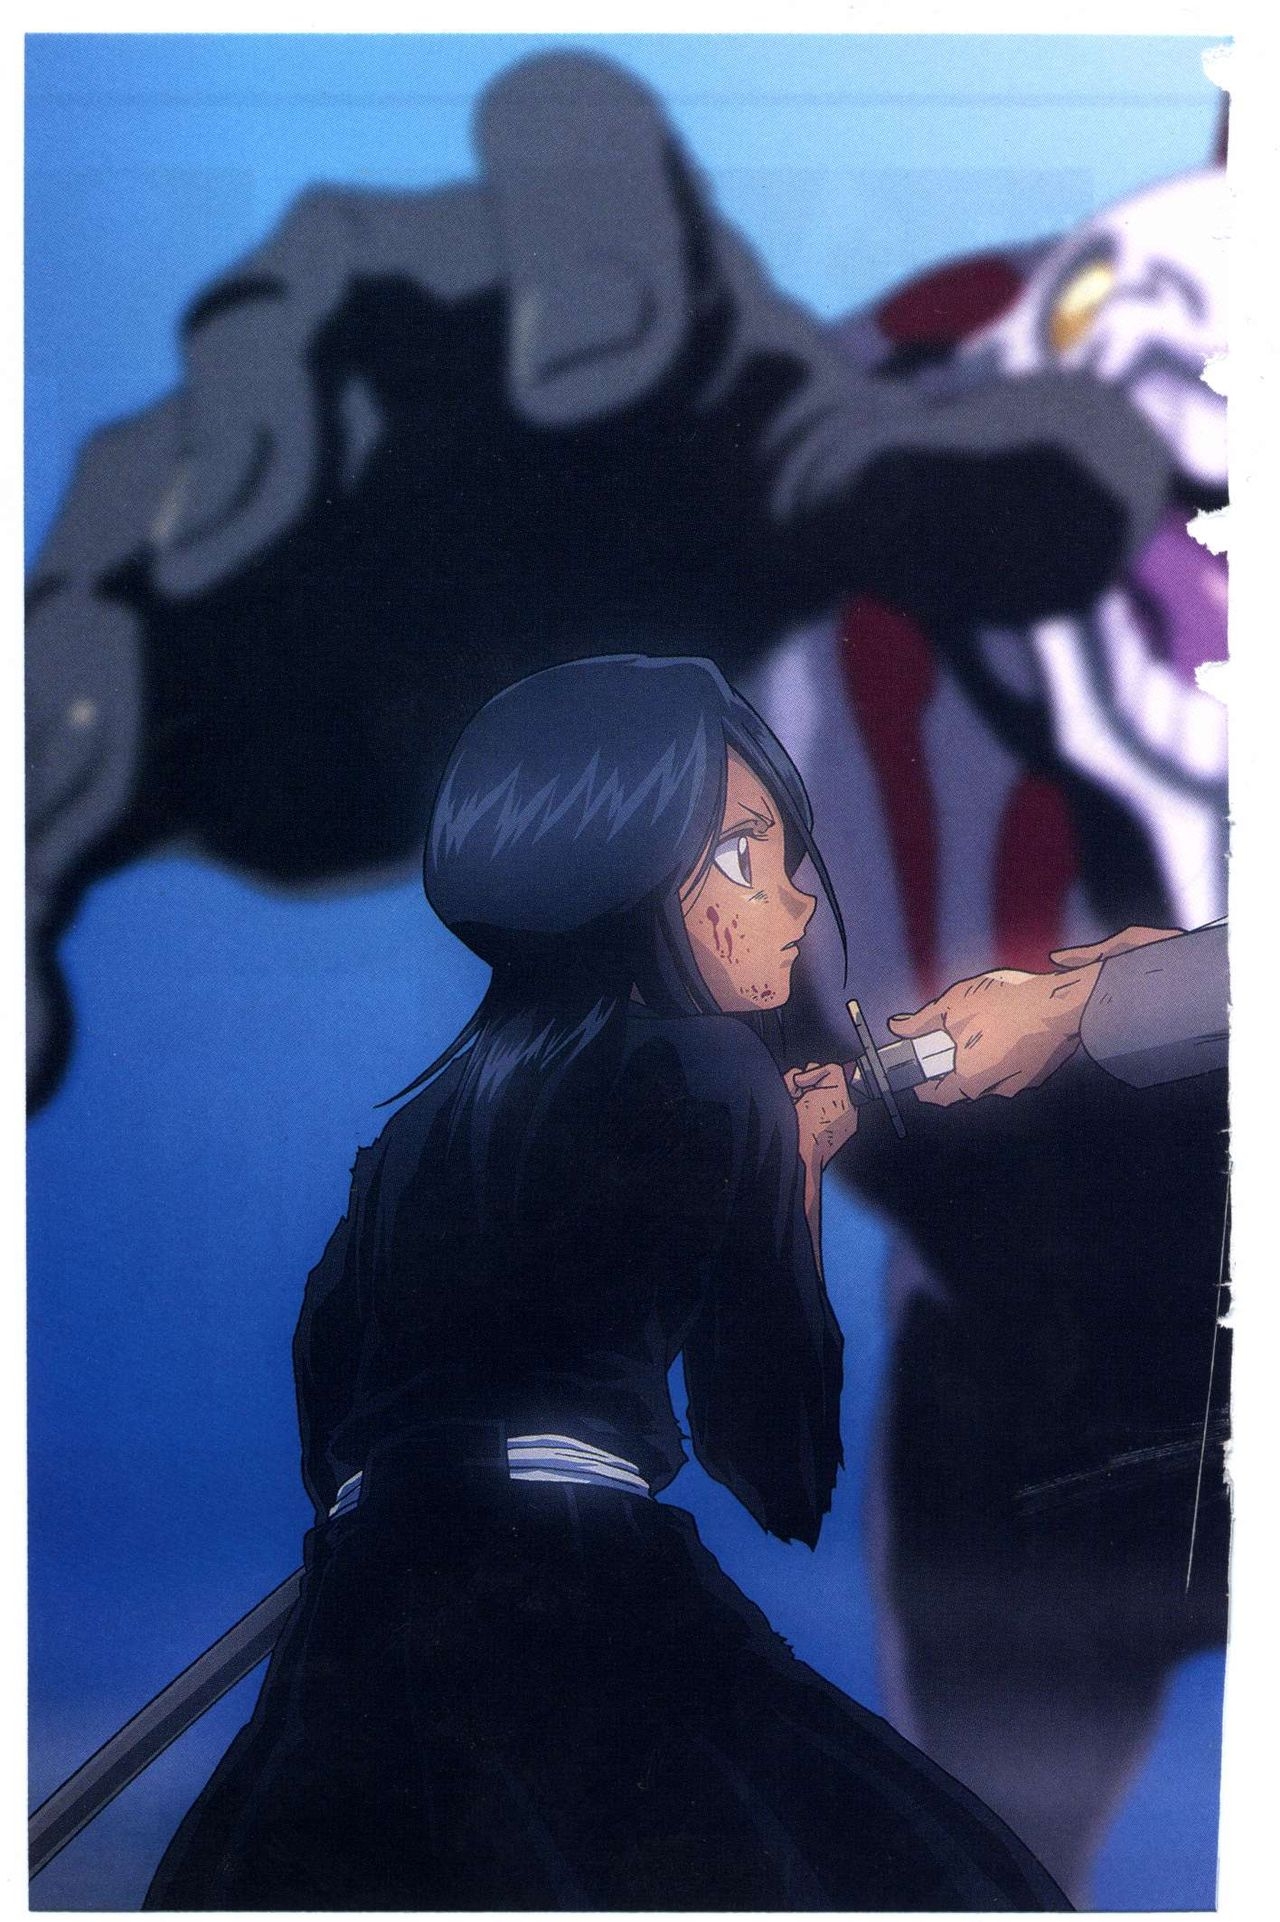 Bleach: Official Animation Book VIBEs 33